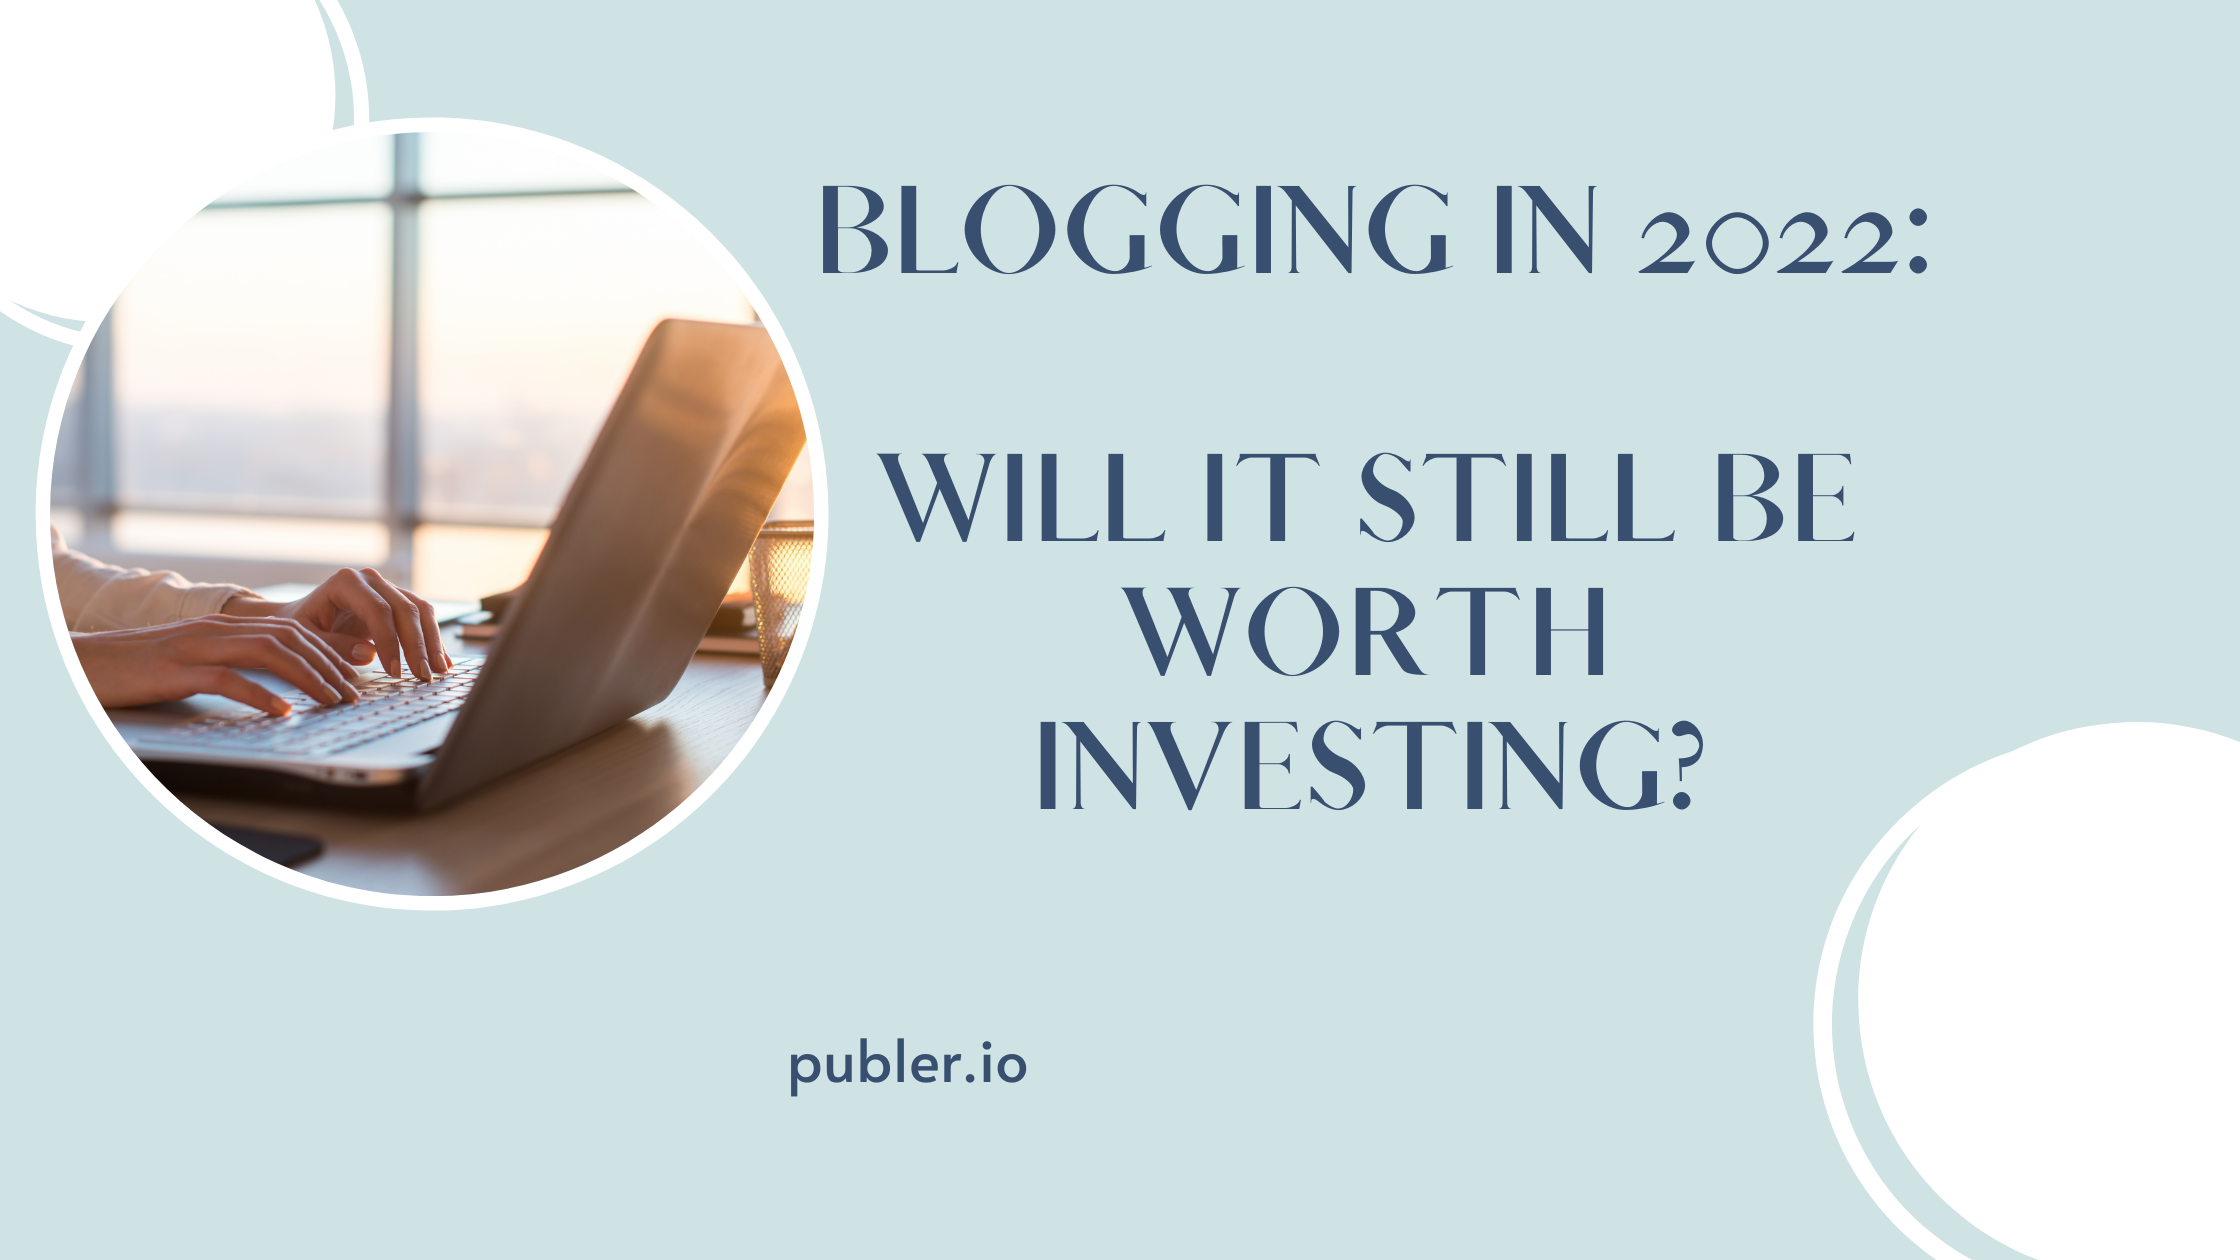 Will blogging still be worth it in 2022? We have prepared a list of top benefits bloggers can display to every reader.